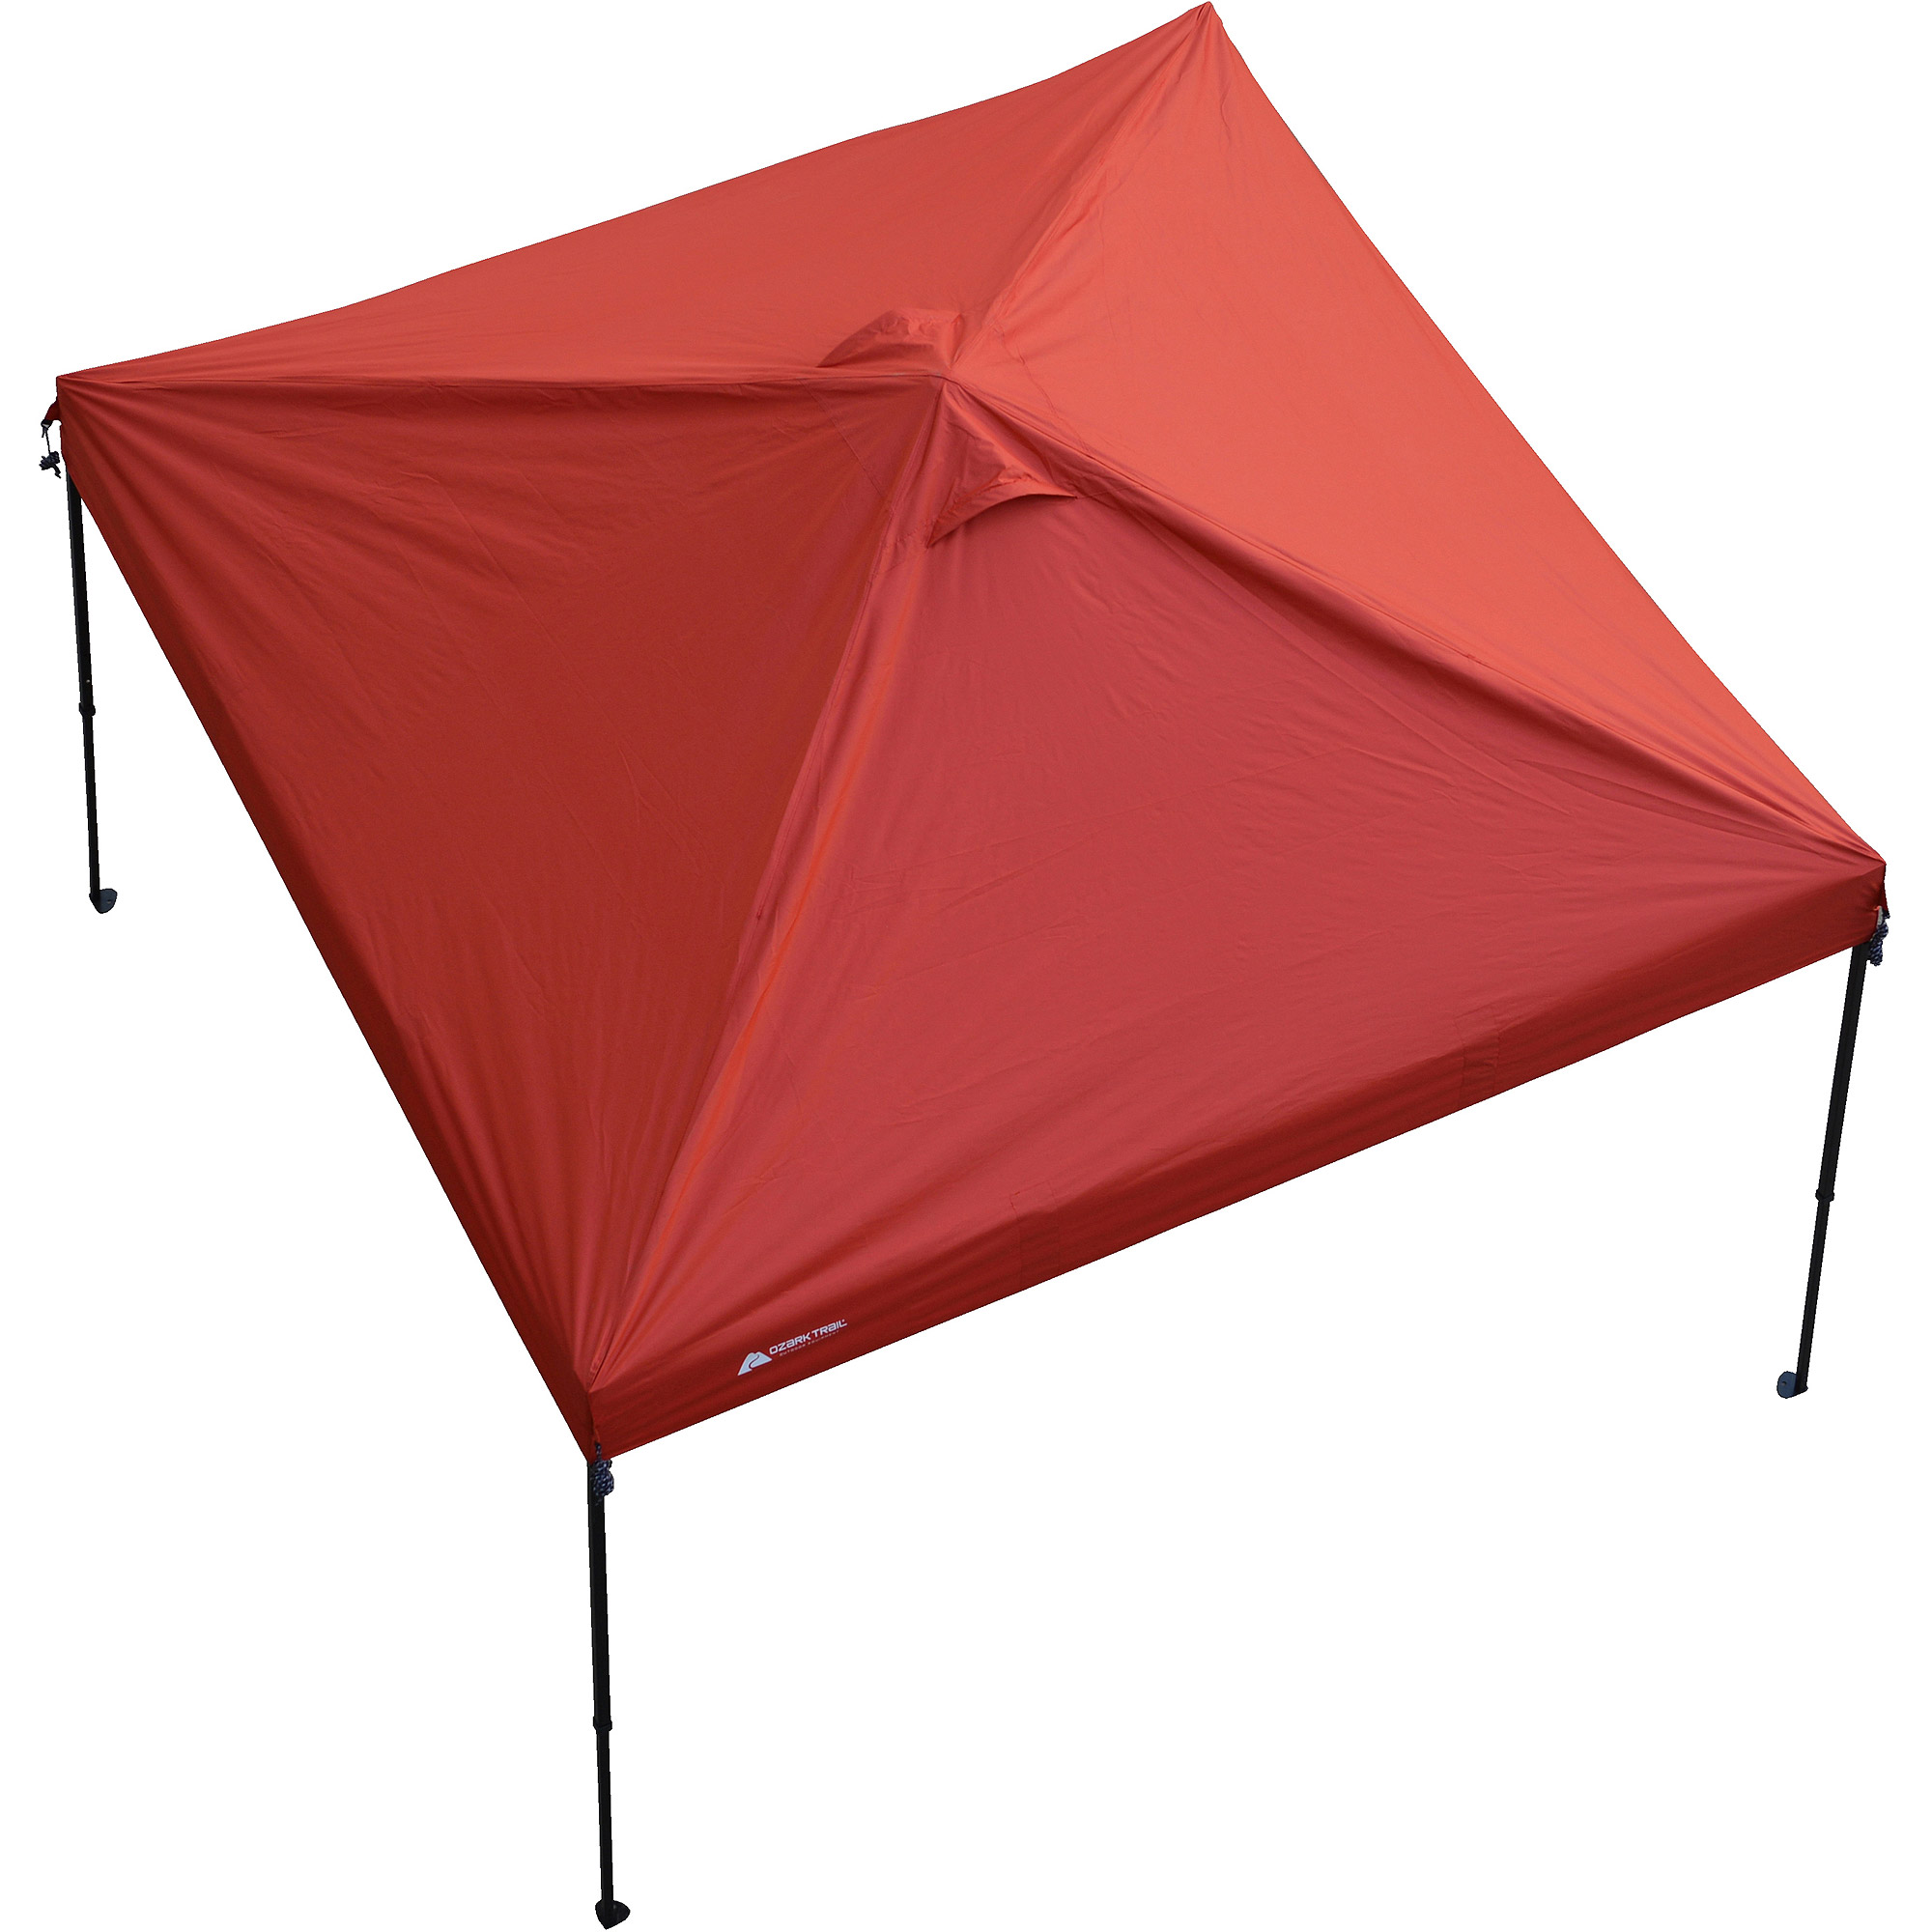 Ozark Trail 10' x 10' Top Replacement Cover for outdoor canopy, Red - image 3 of 7